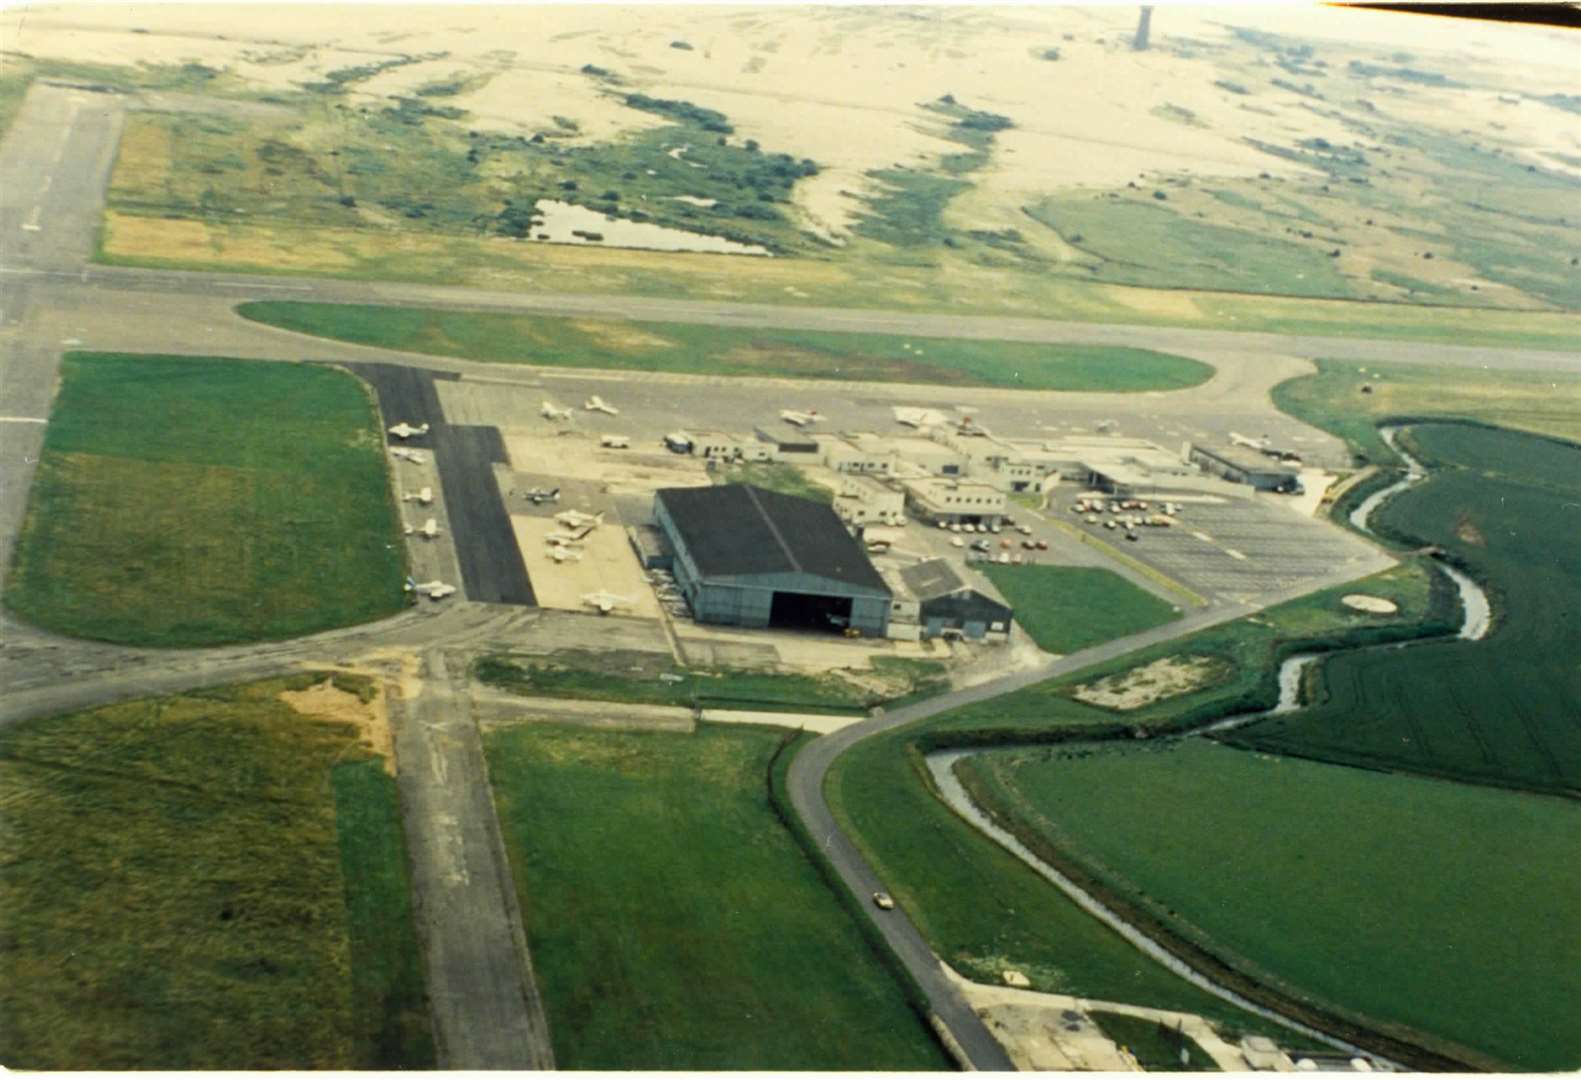 Aerial view of Lydd airport in 1991